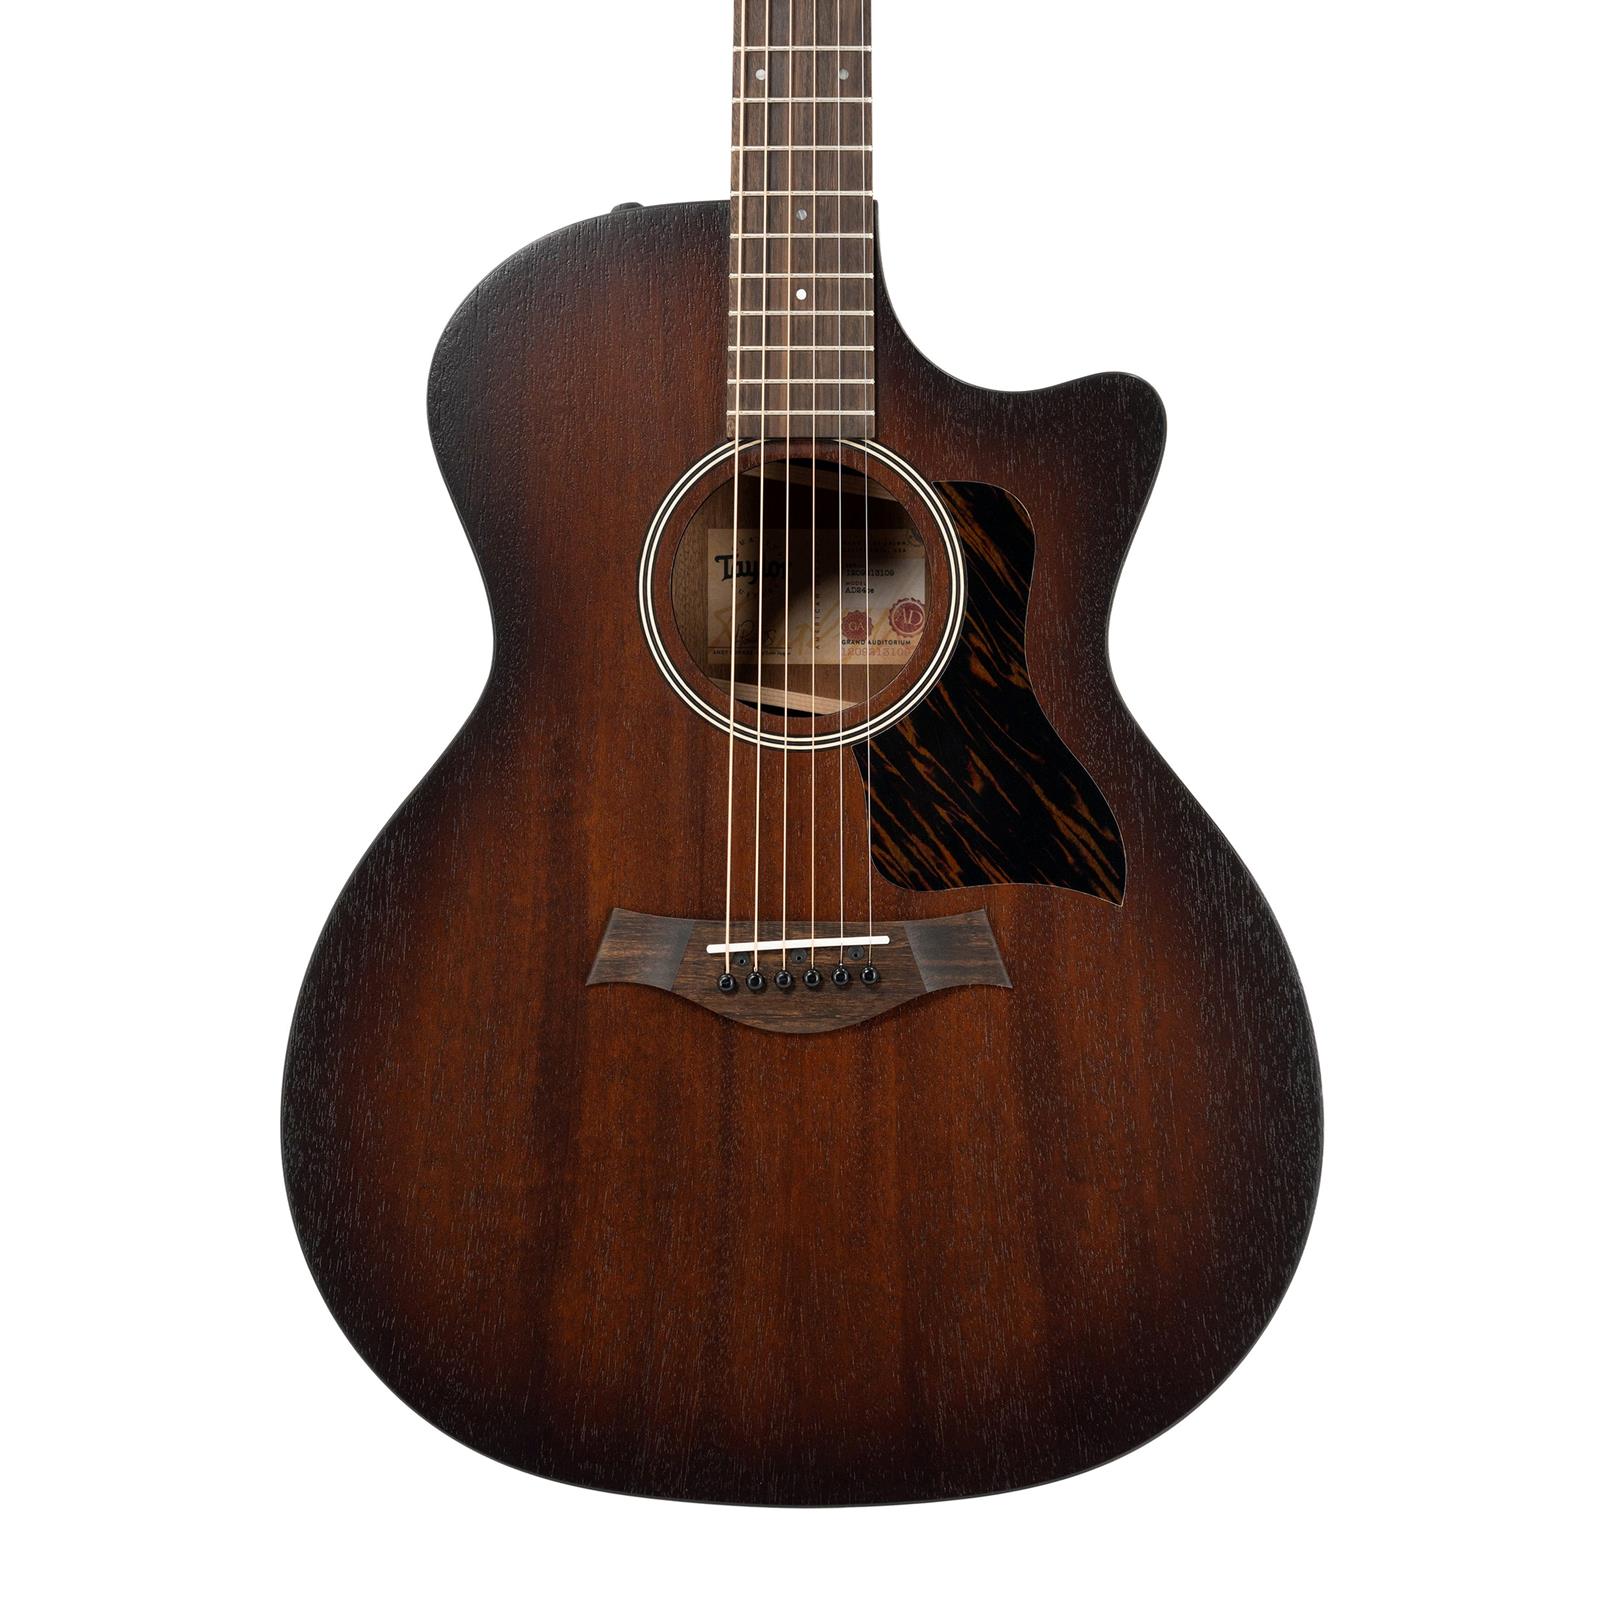 Taylor AD24ce Special Edition Shaded Edge Burst